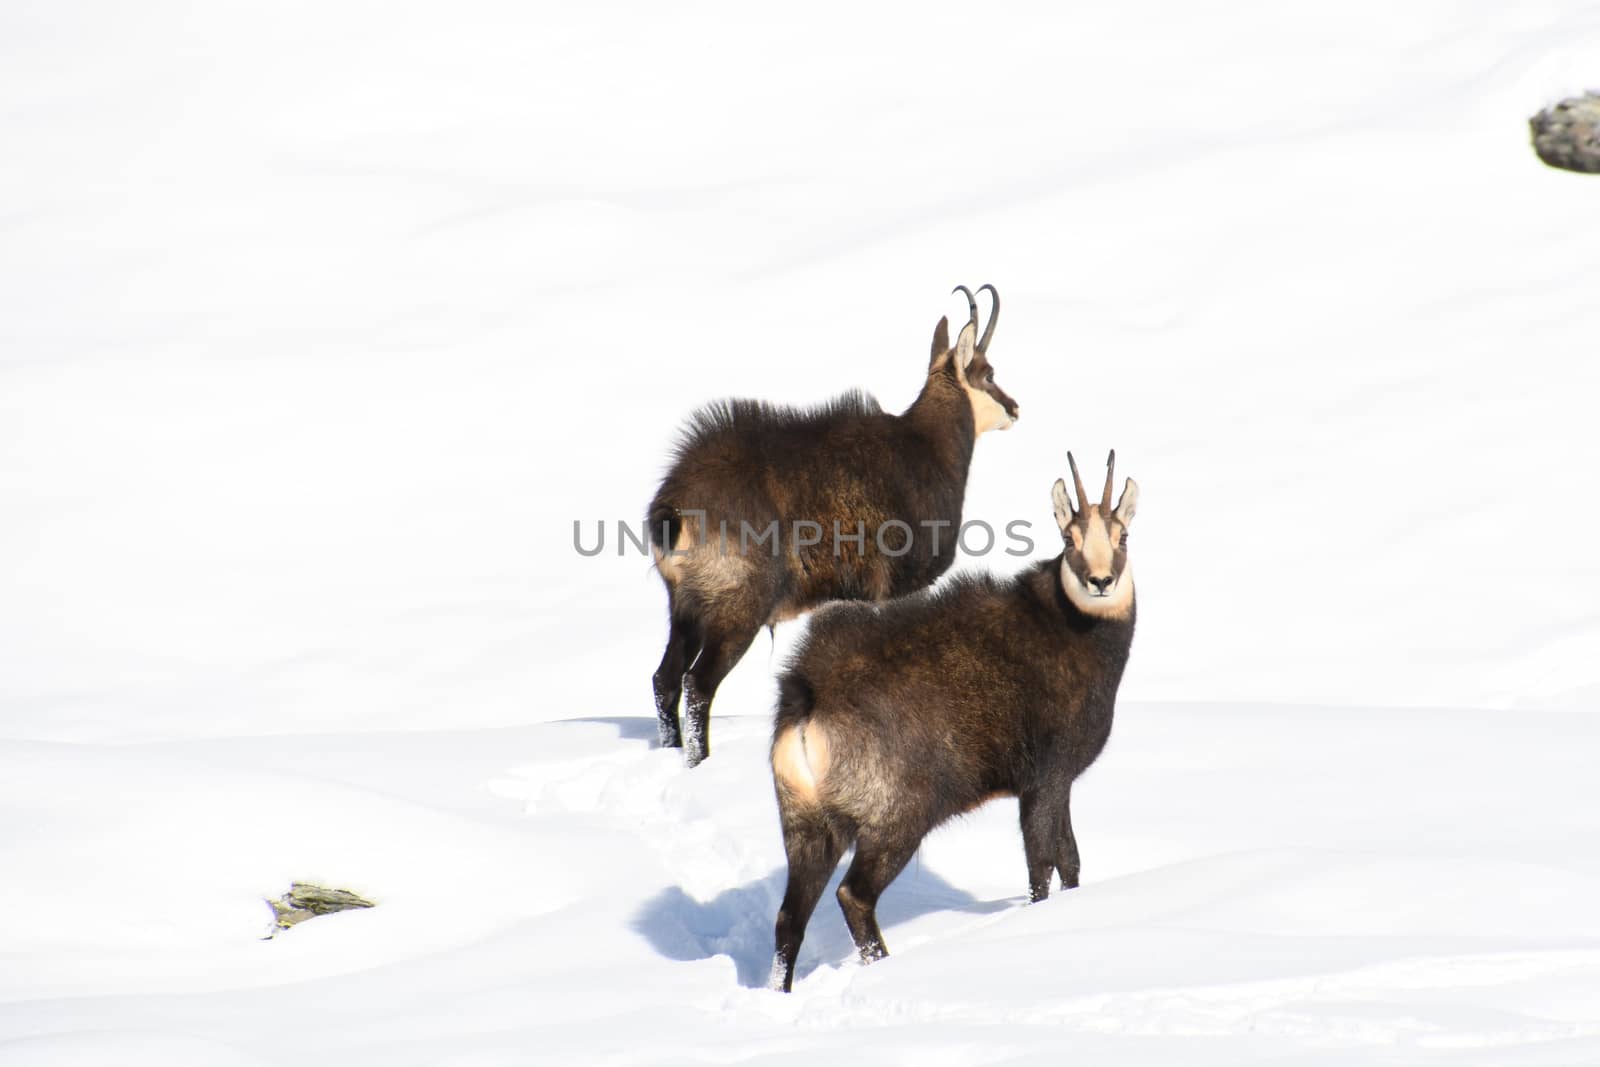 The chamois on the snow, in the Gran Paradiso park